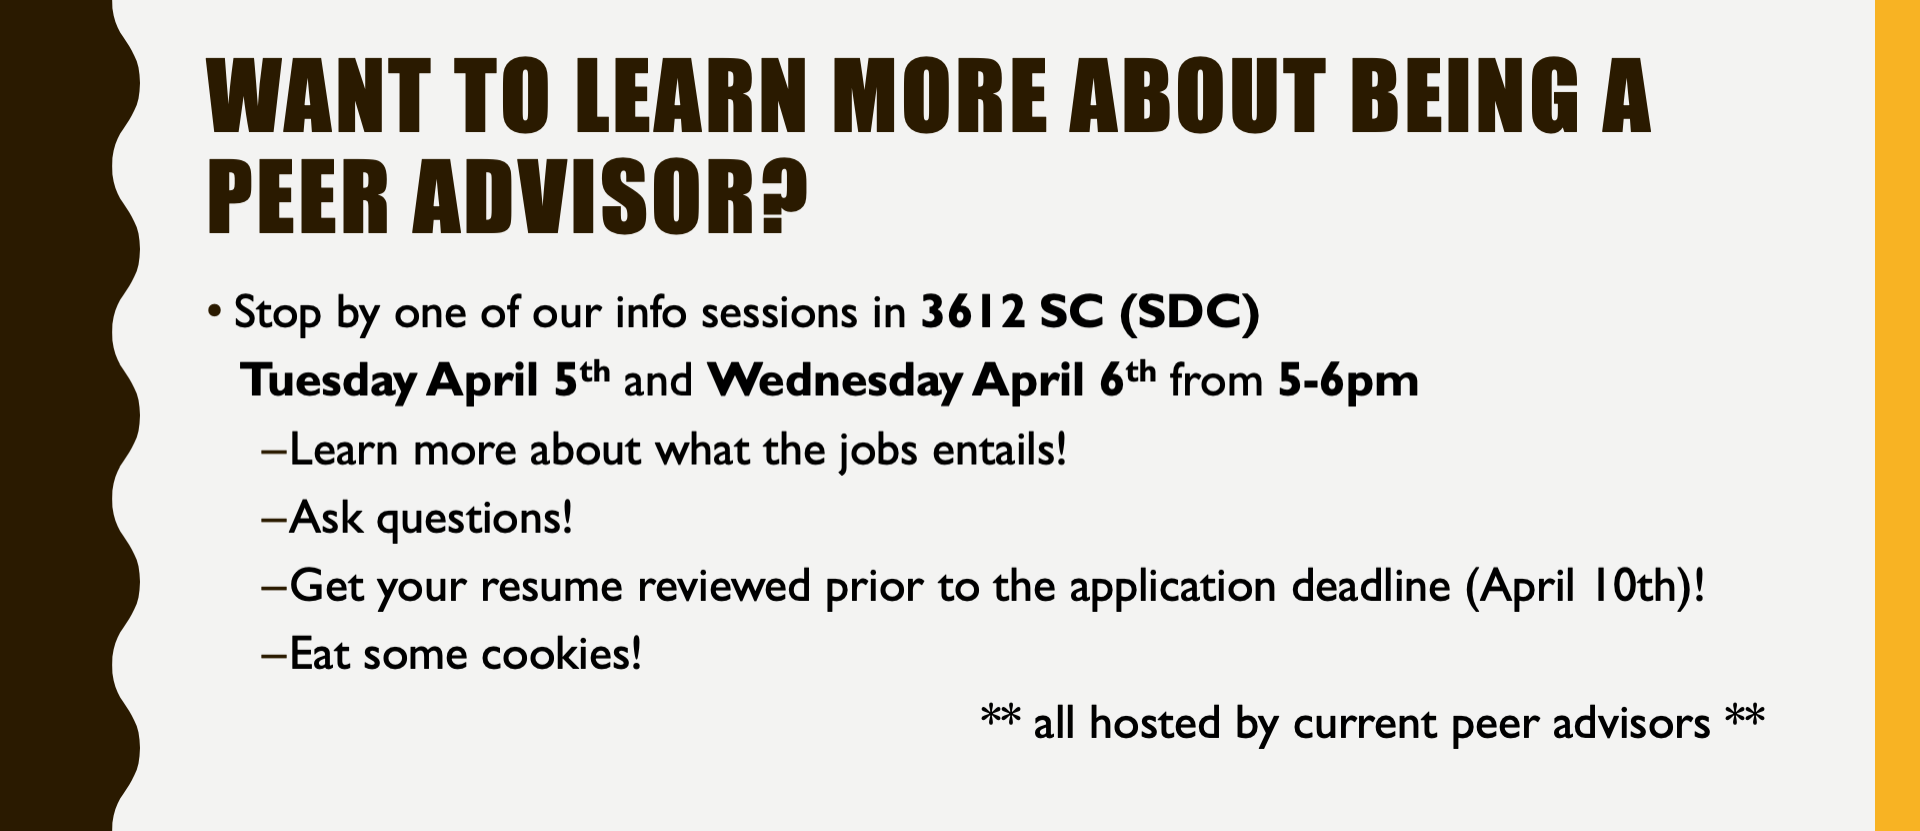 Want to learn more about being a peer advisor?